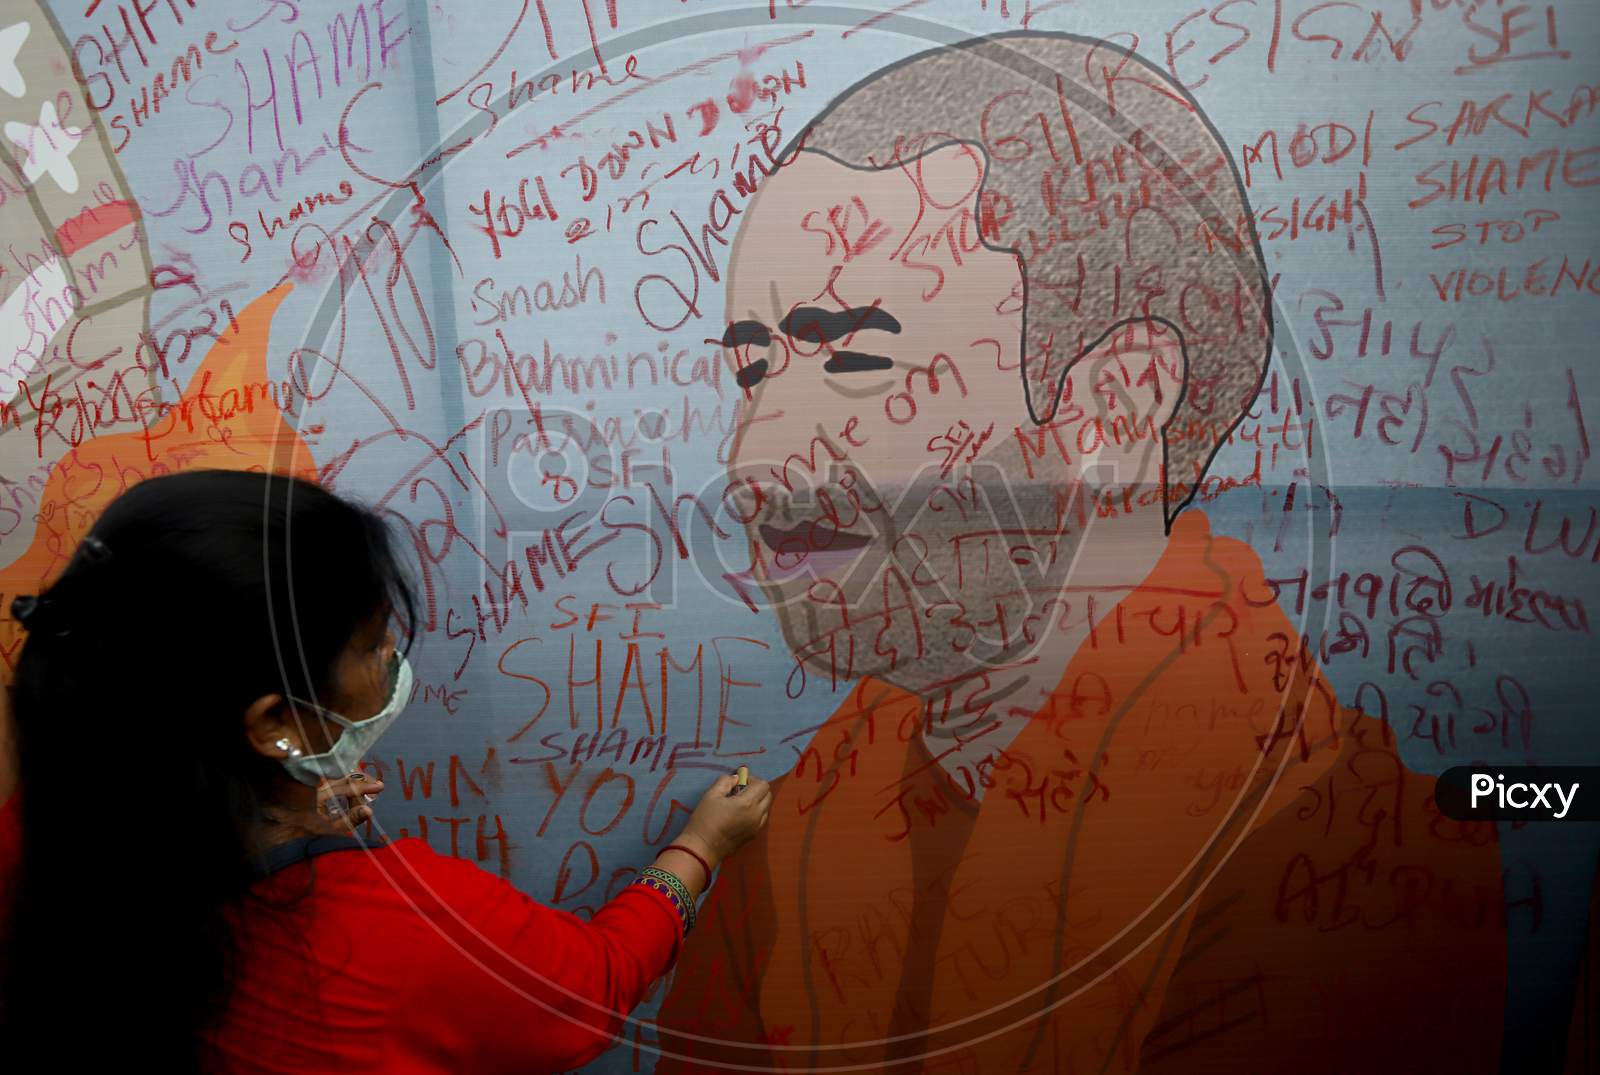 A demonstrator uses a lipstick to write on a billboard during a protest after the death of a rape victim, in New Delhi, India, October 2, 2020.